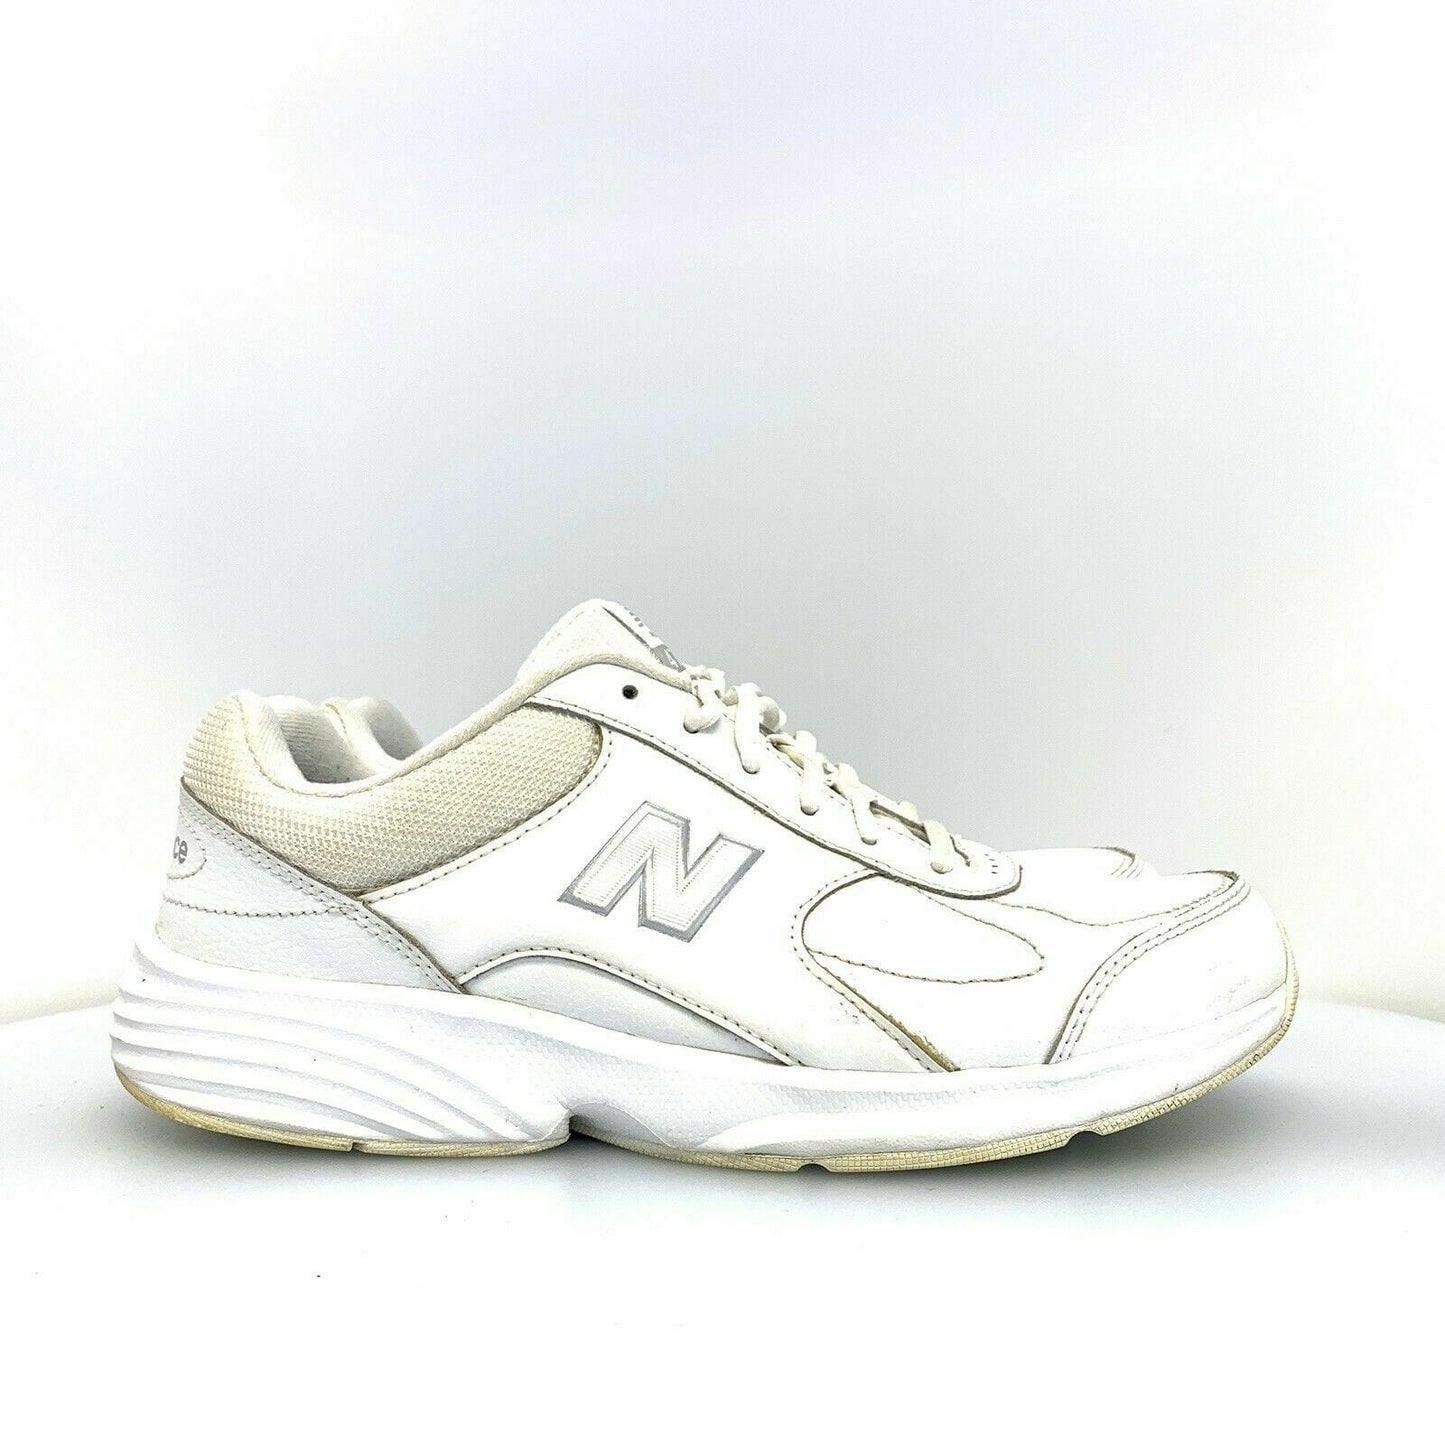 Comfortable New Balance Womens Size 9D White Athletic Shoes - Versatile Sneakers